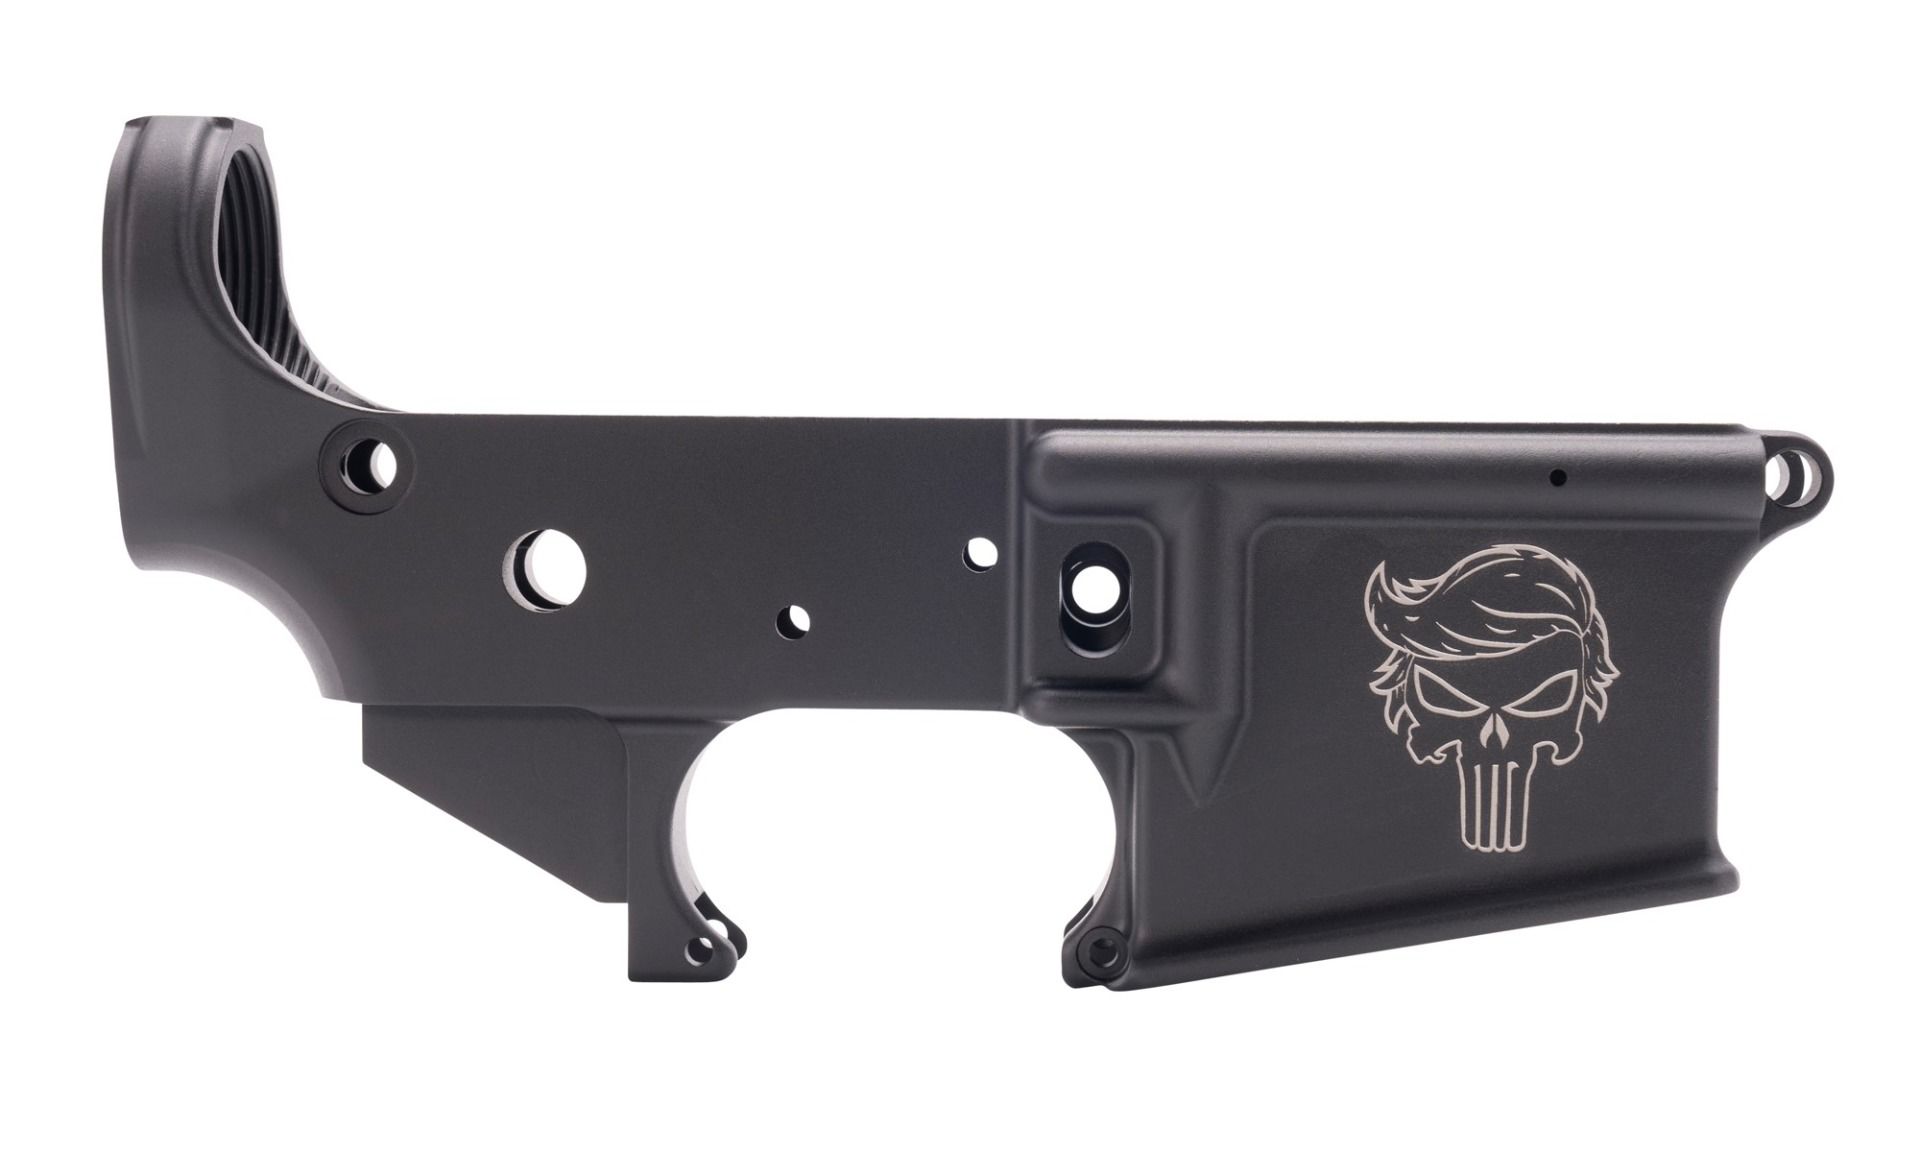 AM AR15 LOWER RECEIVER STRIPPED TRUMPISHER - Rifles & Lower Receivers